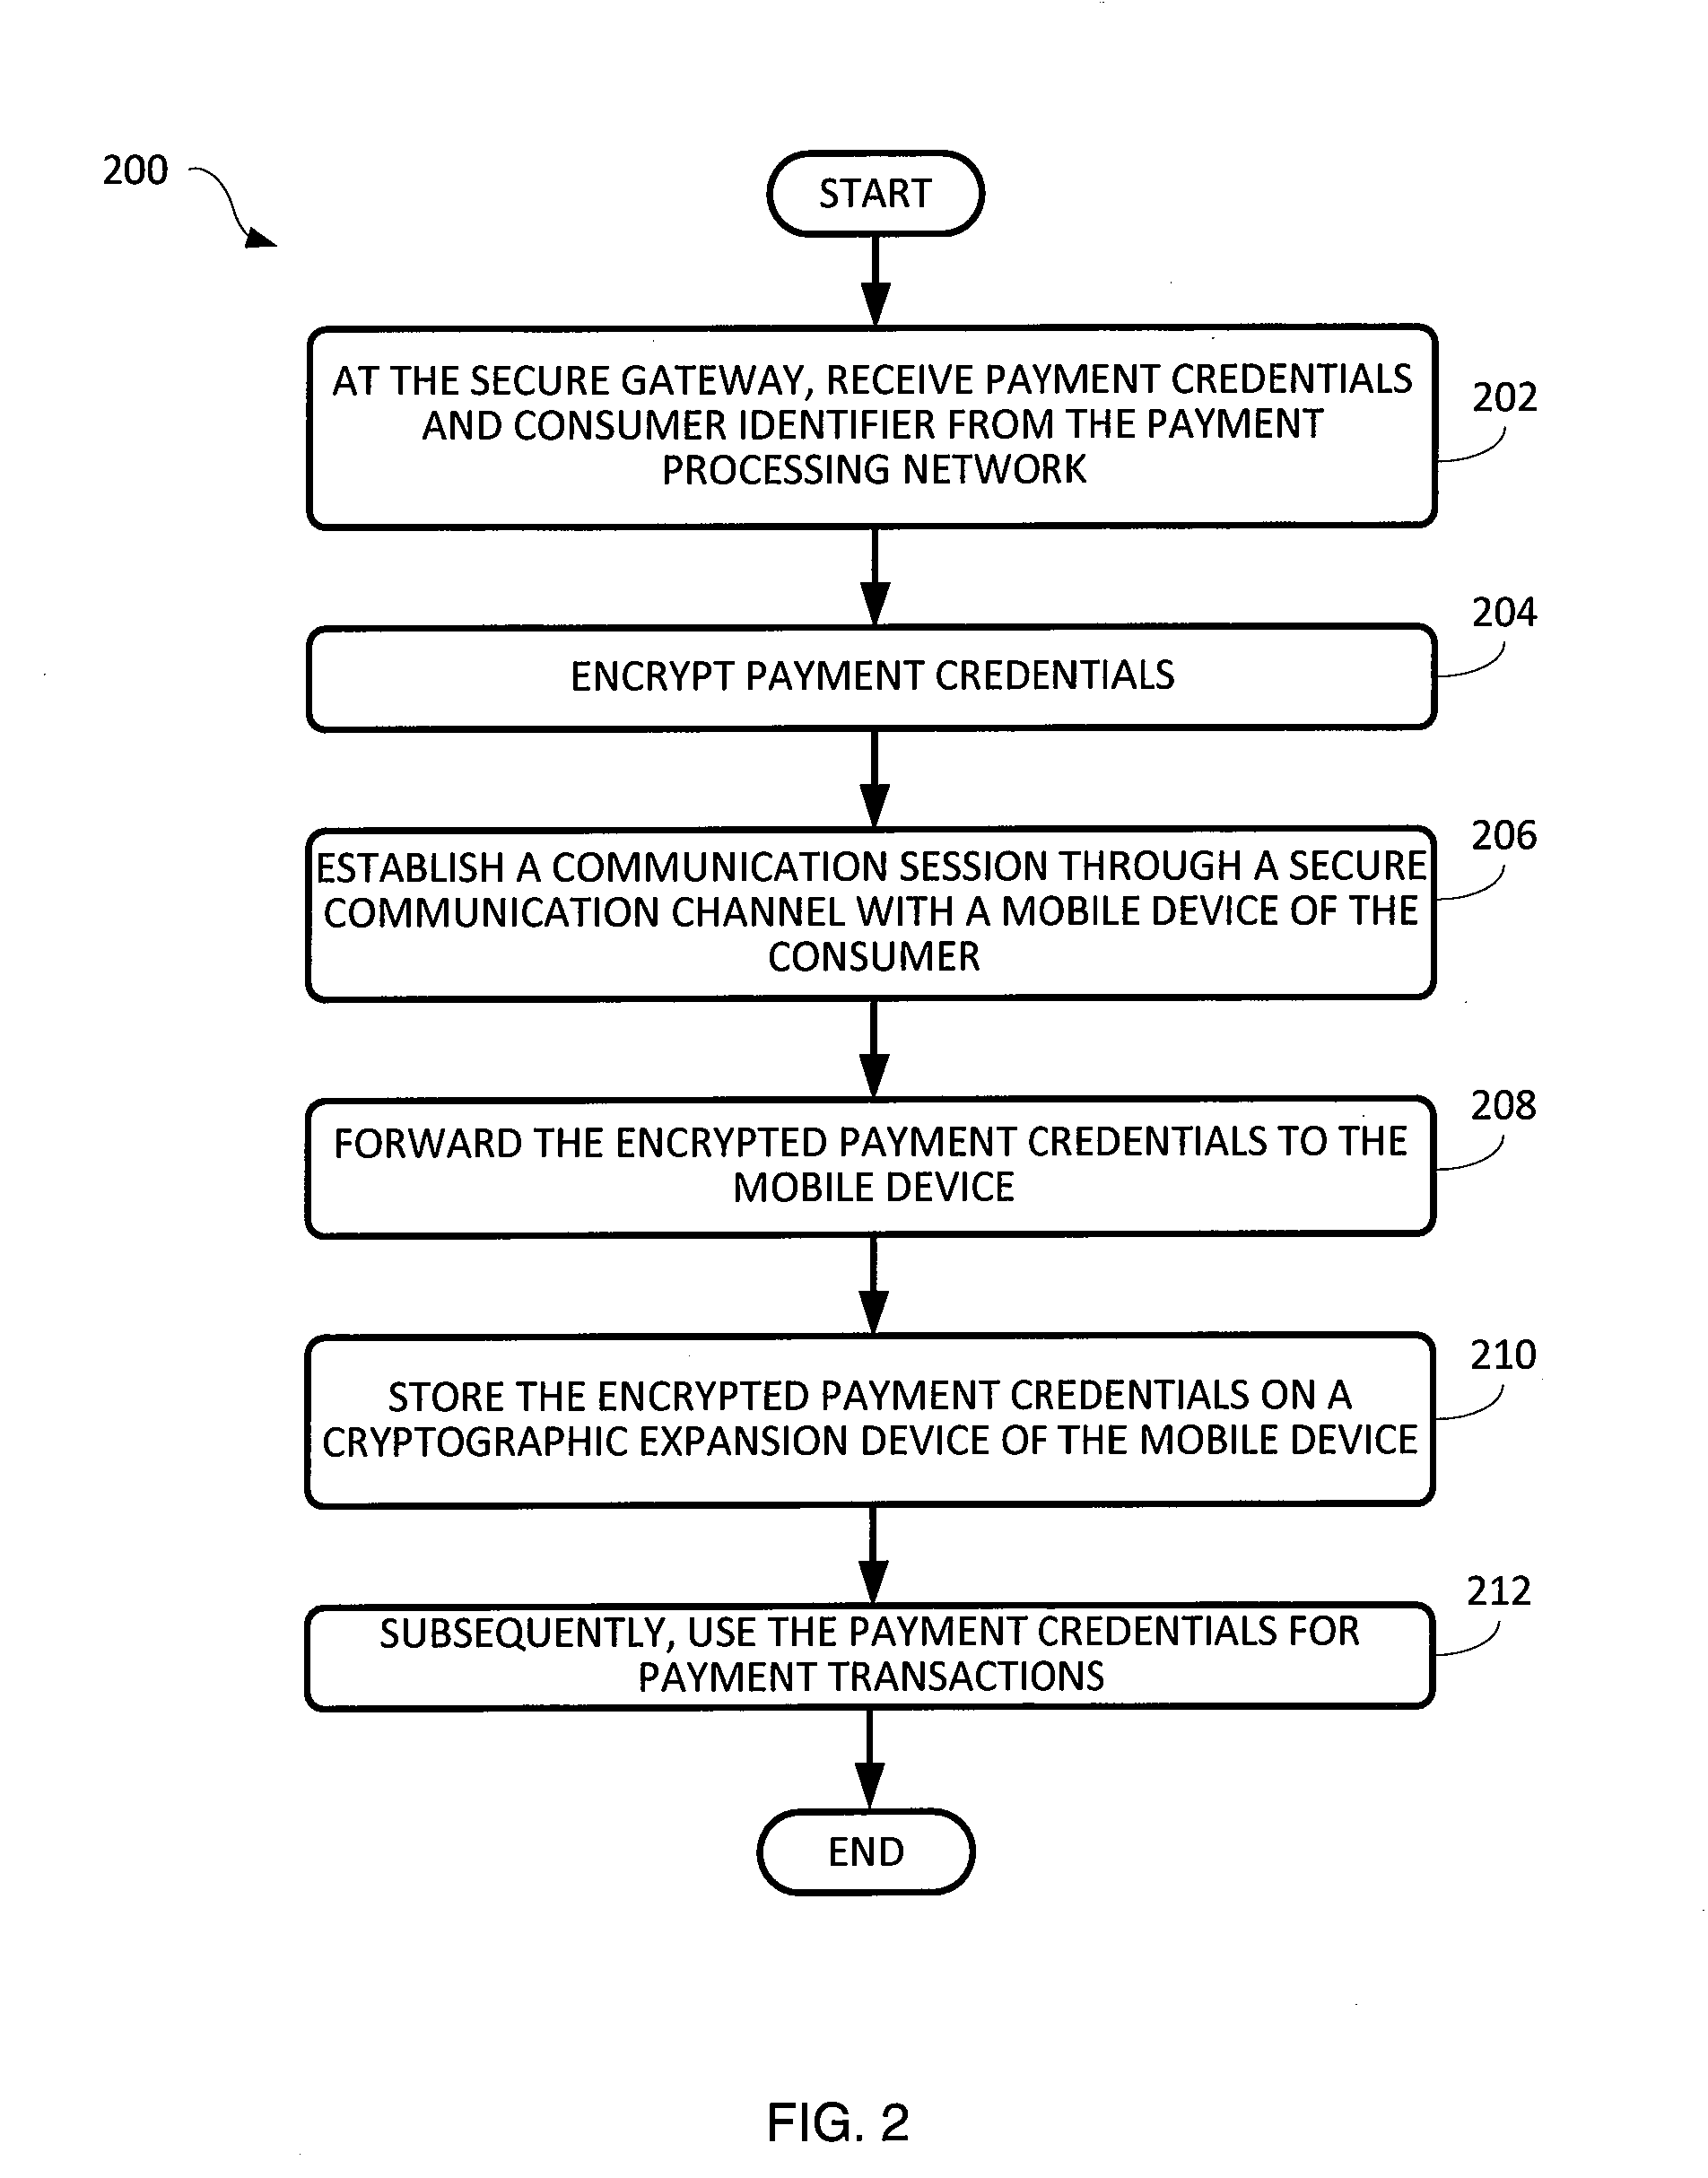 Issuing and storing of payment credentials